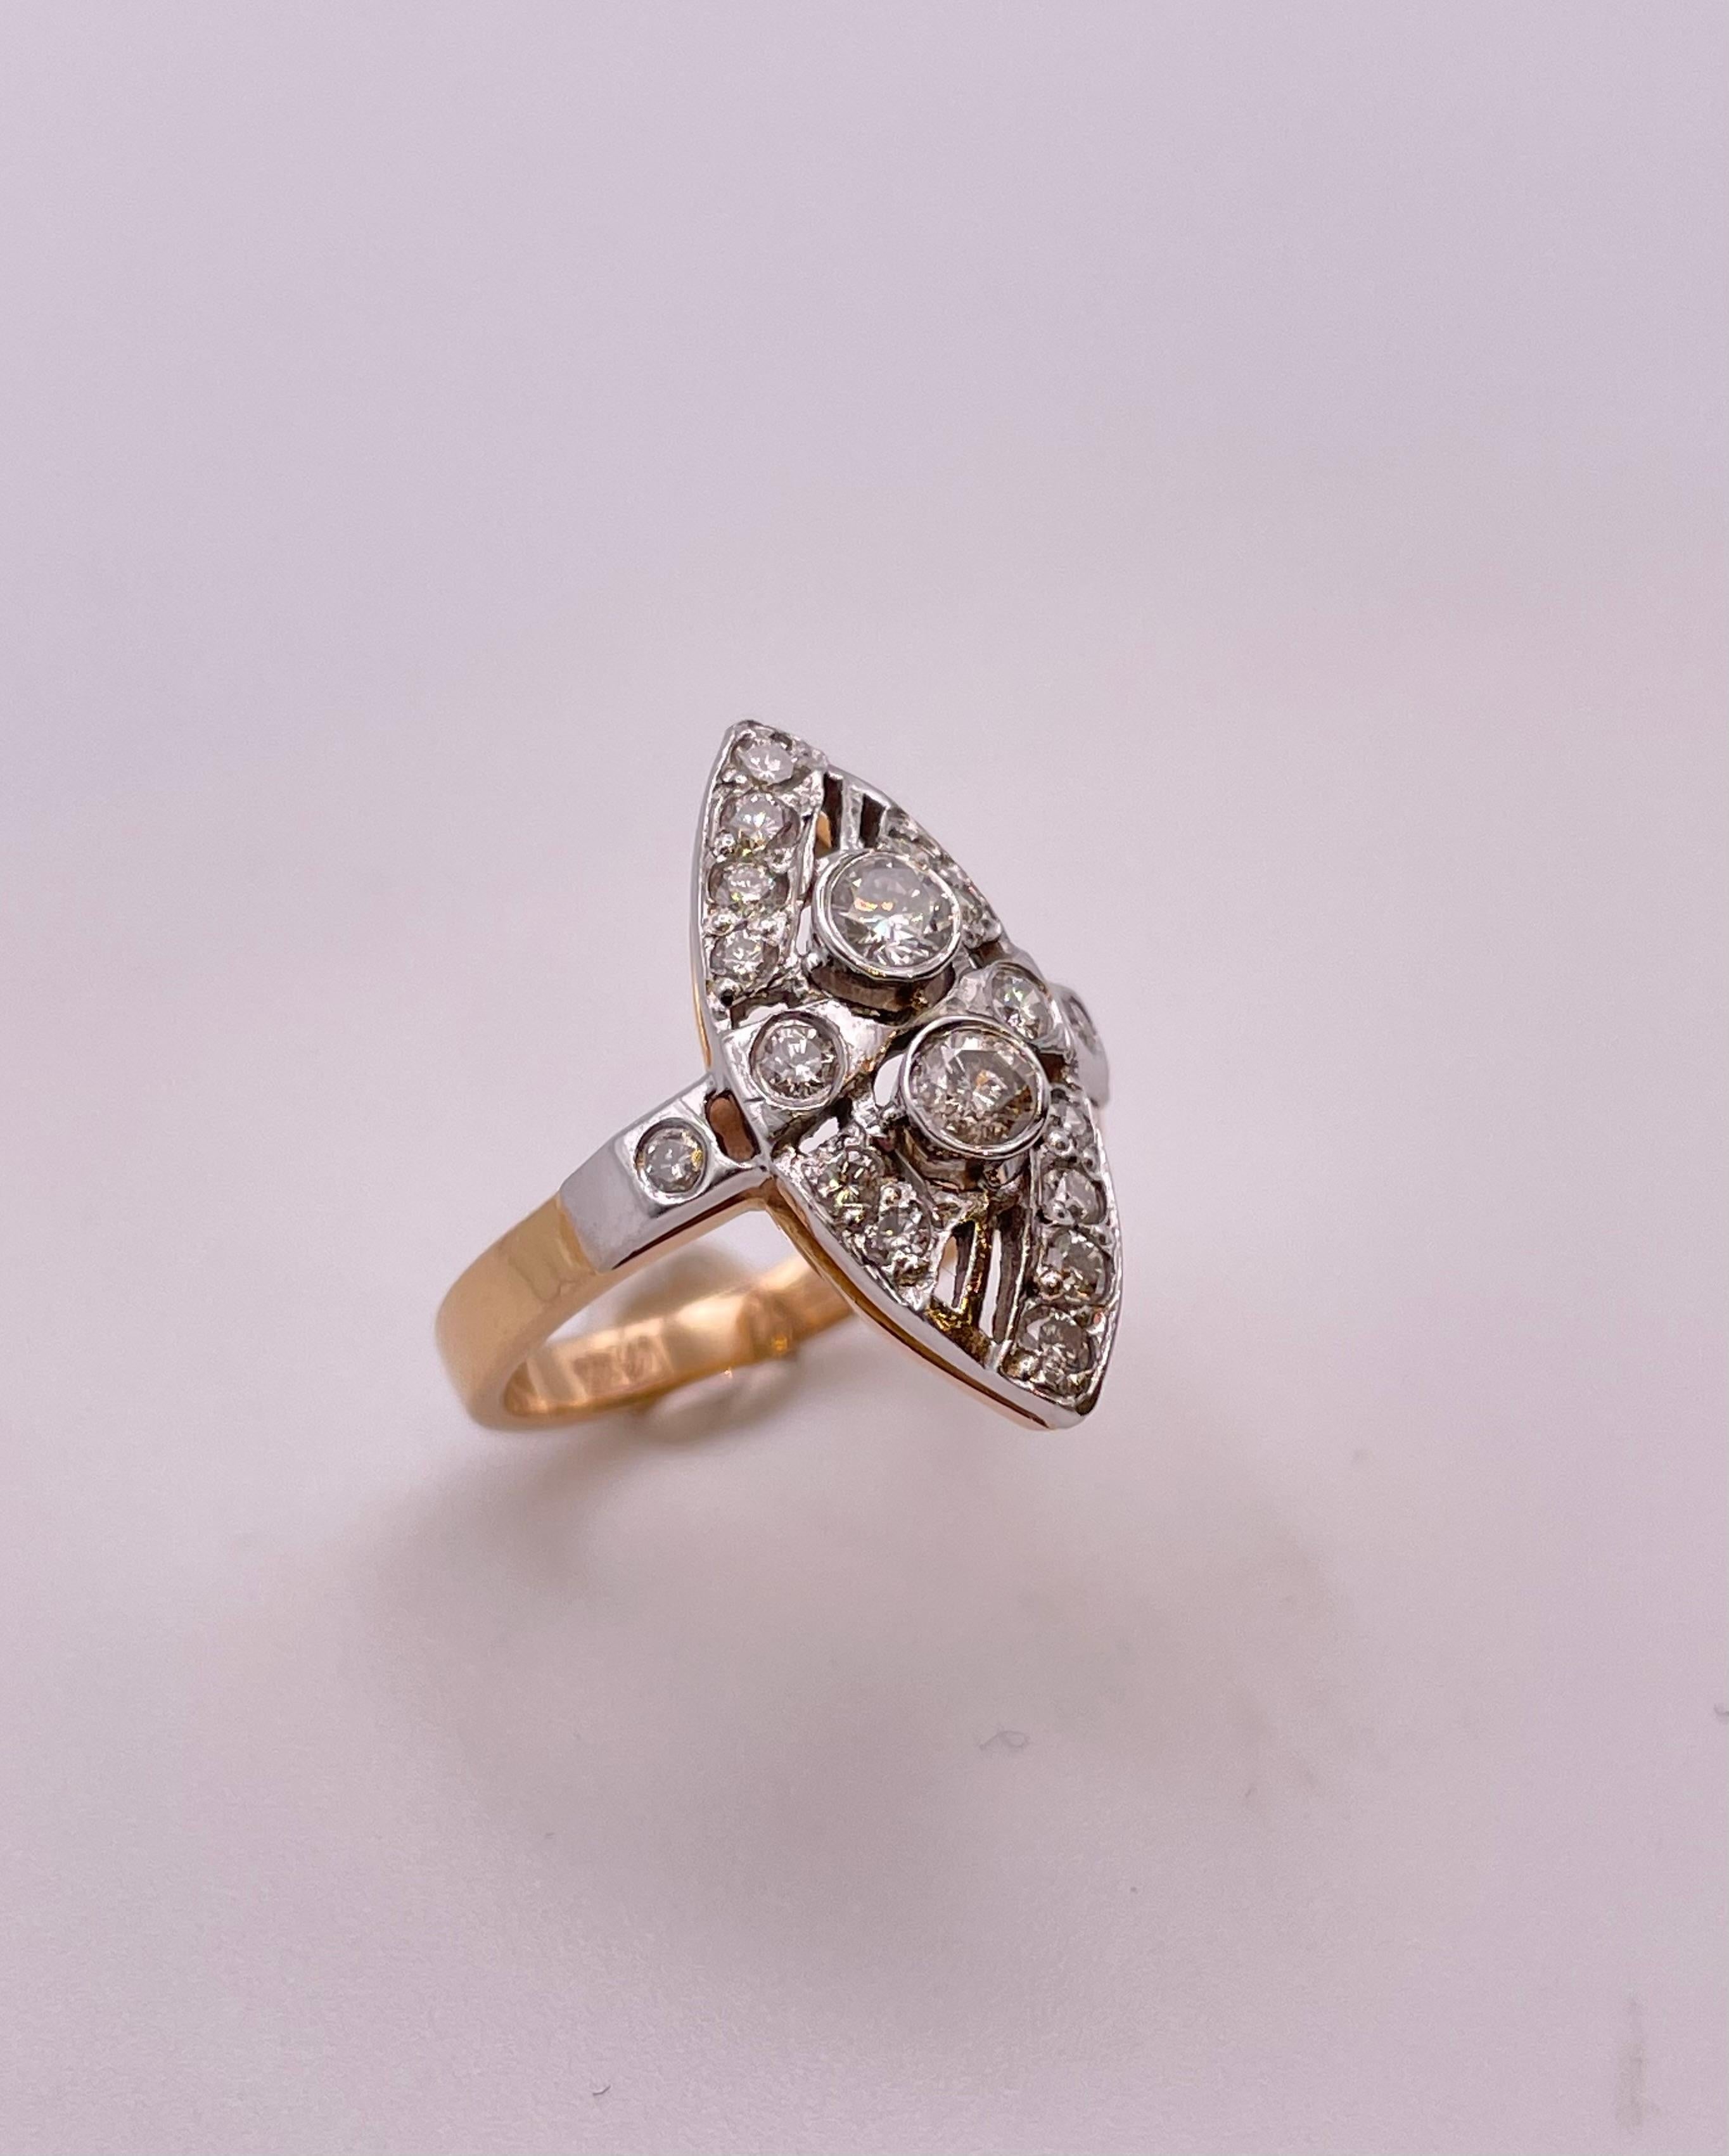 Beautiful Antique Rose cut Diamond Navette Ring set in 14K Gold .
There are rose cut diamonds on the top of the ring in a navette shape and the ring is in great condition .
this ring made early 20th century ( 1920-1930 )